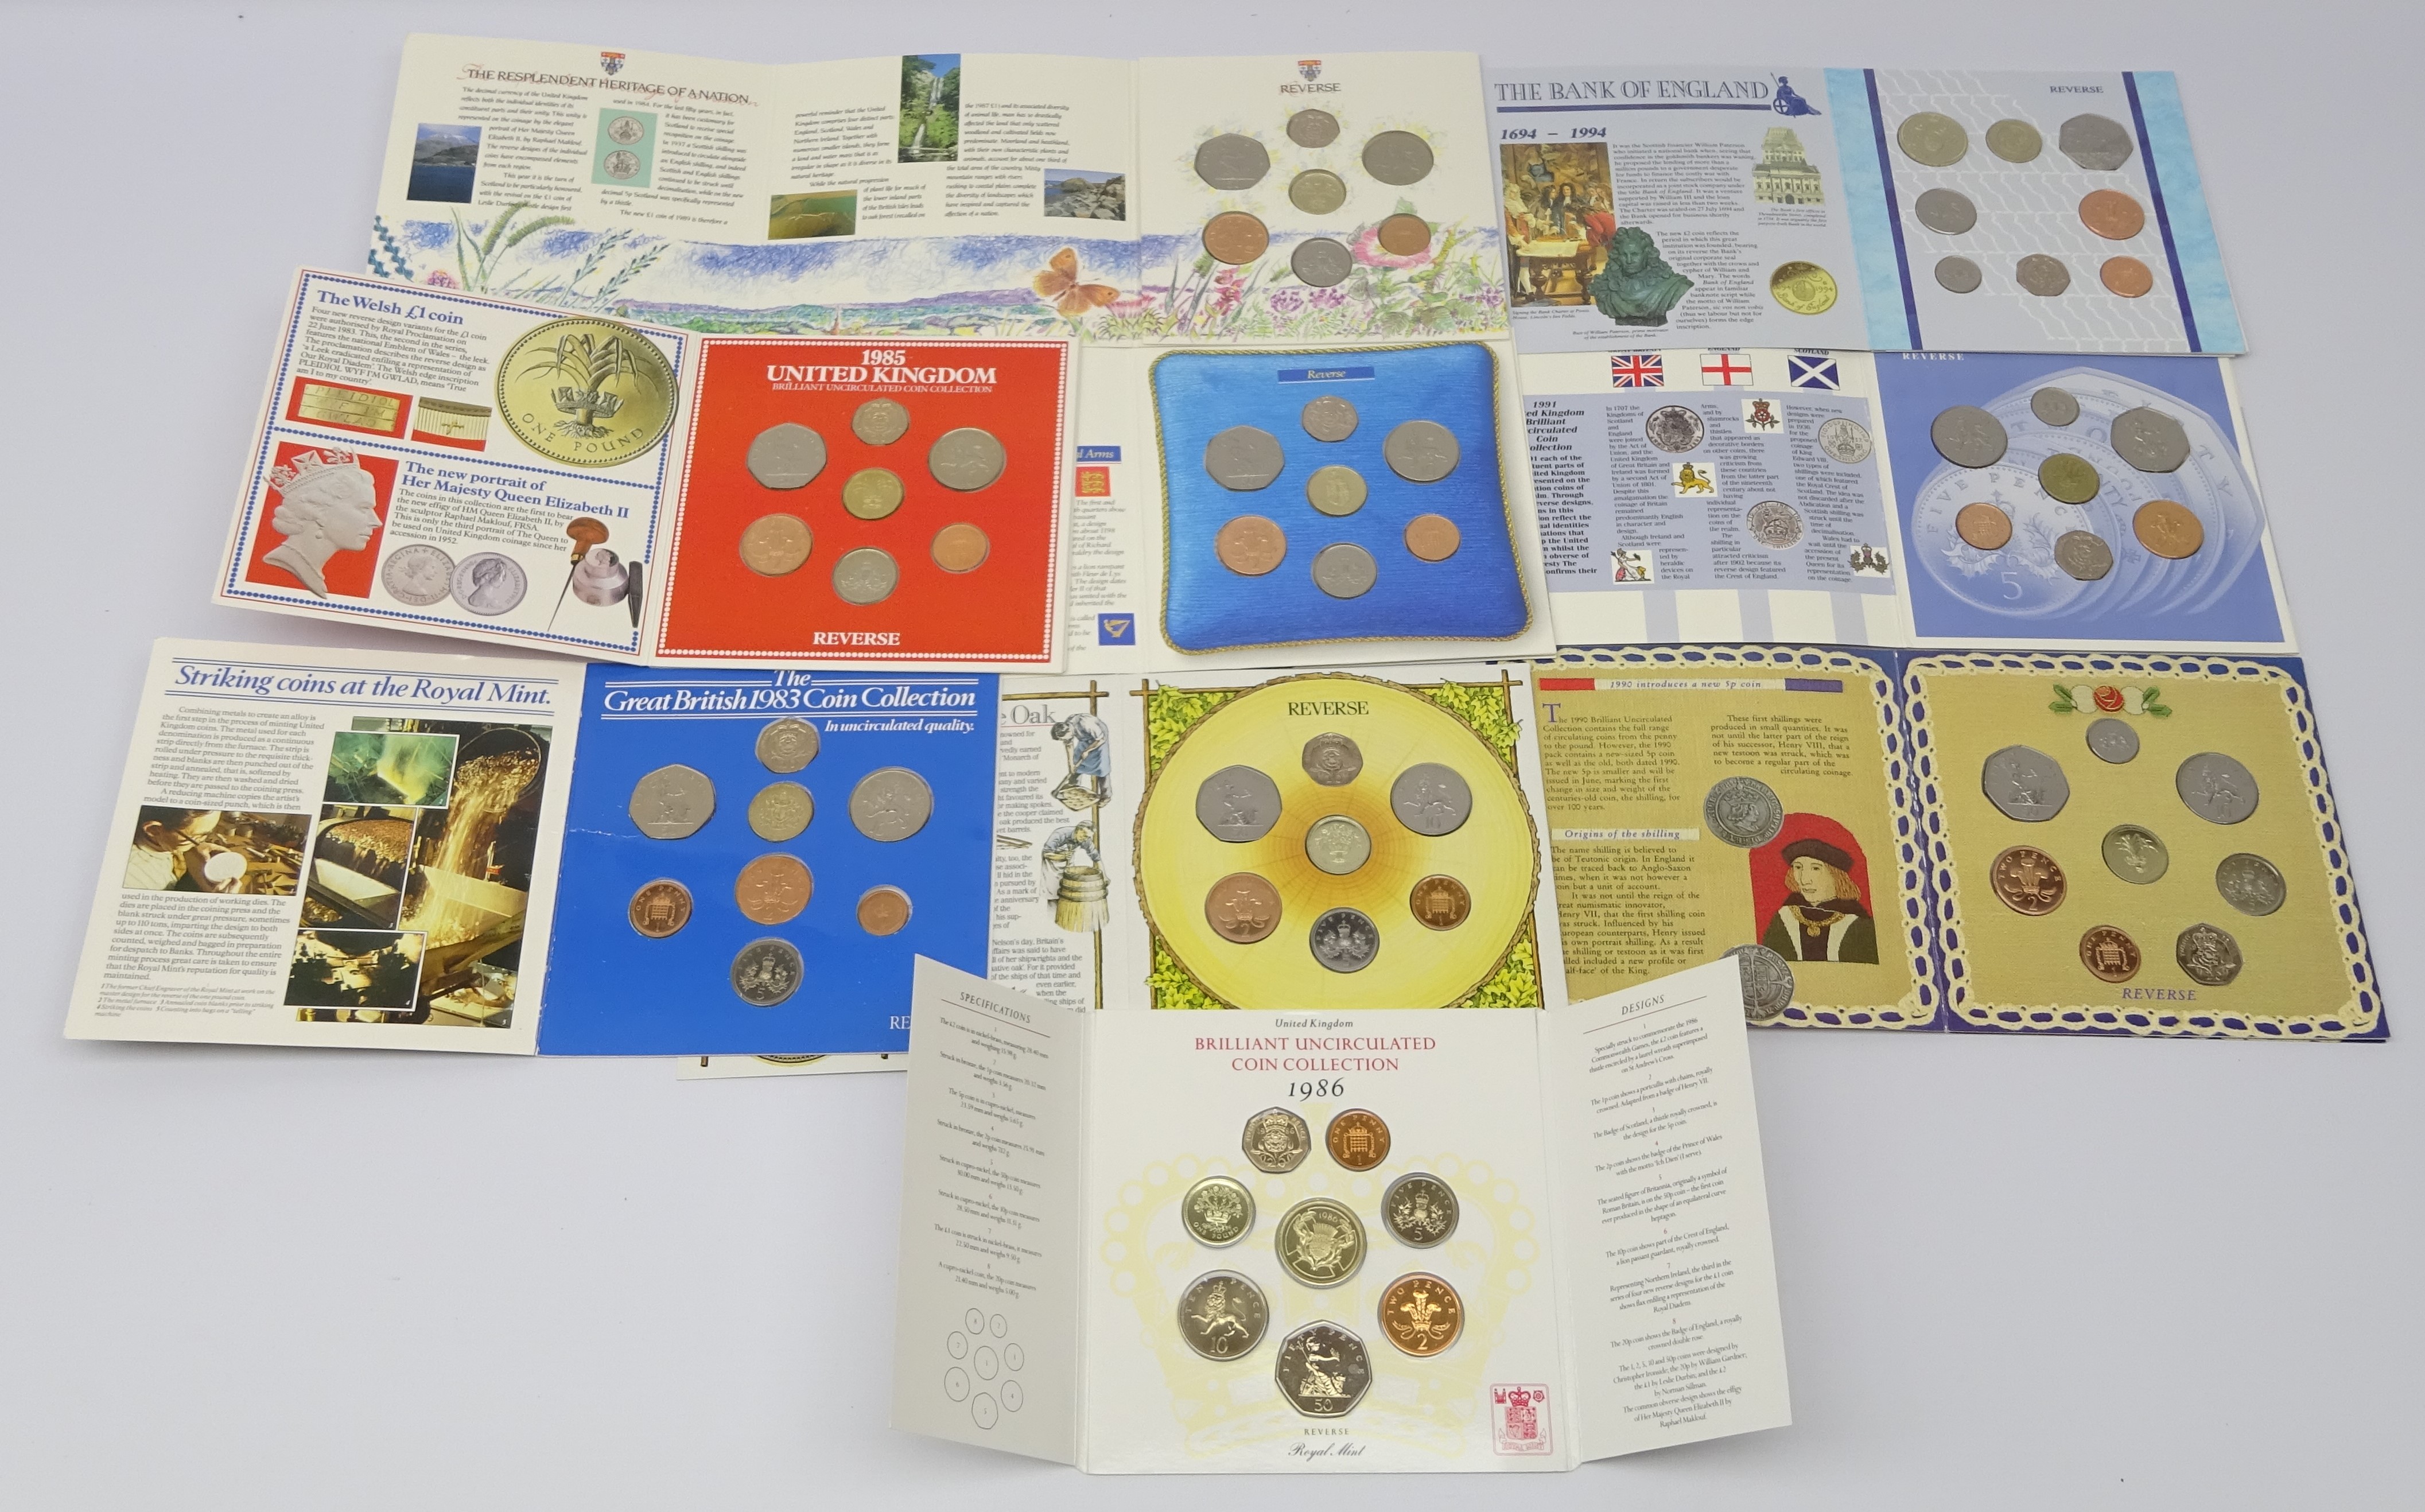 Nine United Kingdom brilliant uncirculated coin collections; 1983, 1985, 1986, 1987, 1988, 1989,